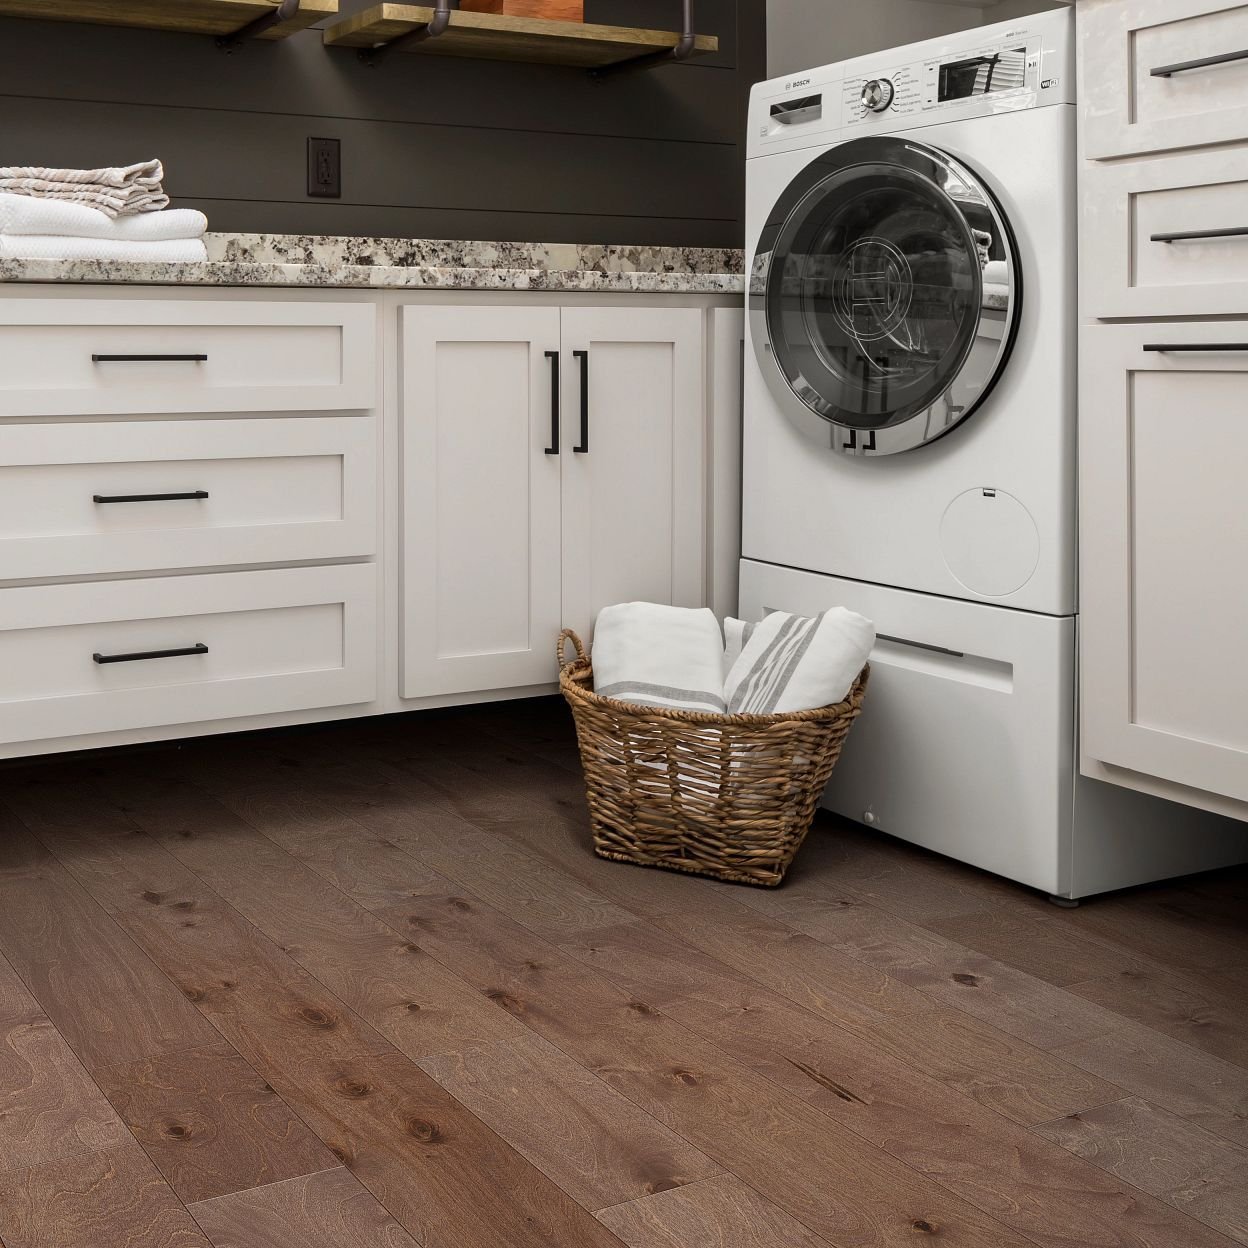 Laundry room with hardwood flooring from Carpet Design Center in the Greenville, NC area